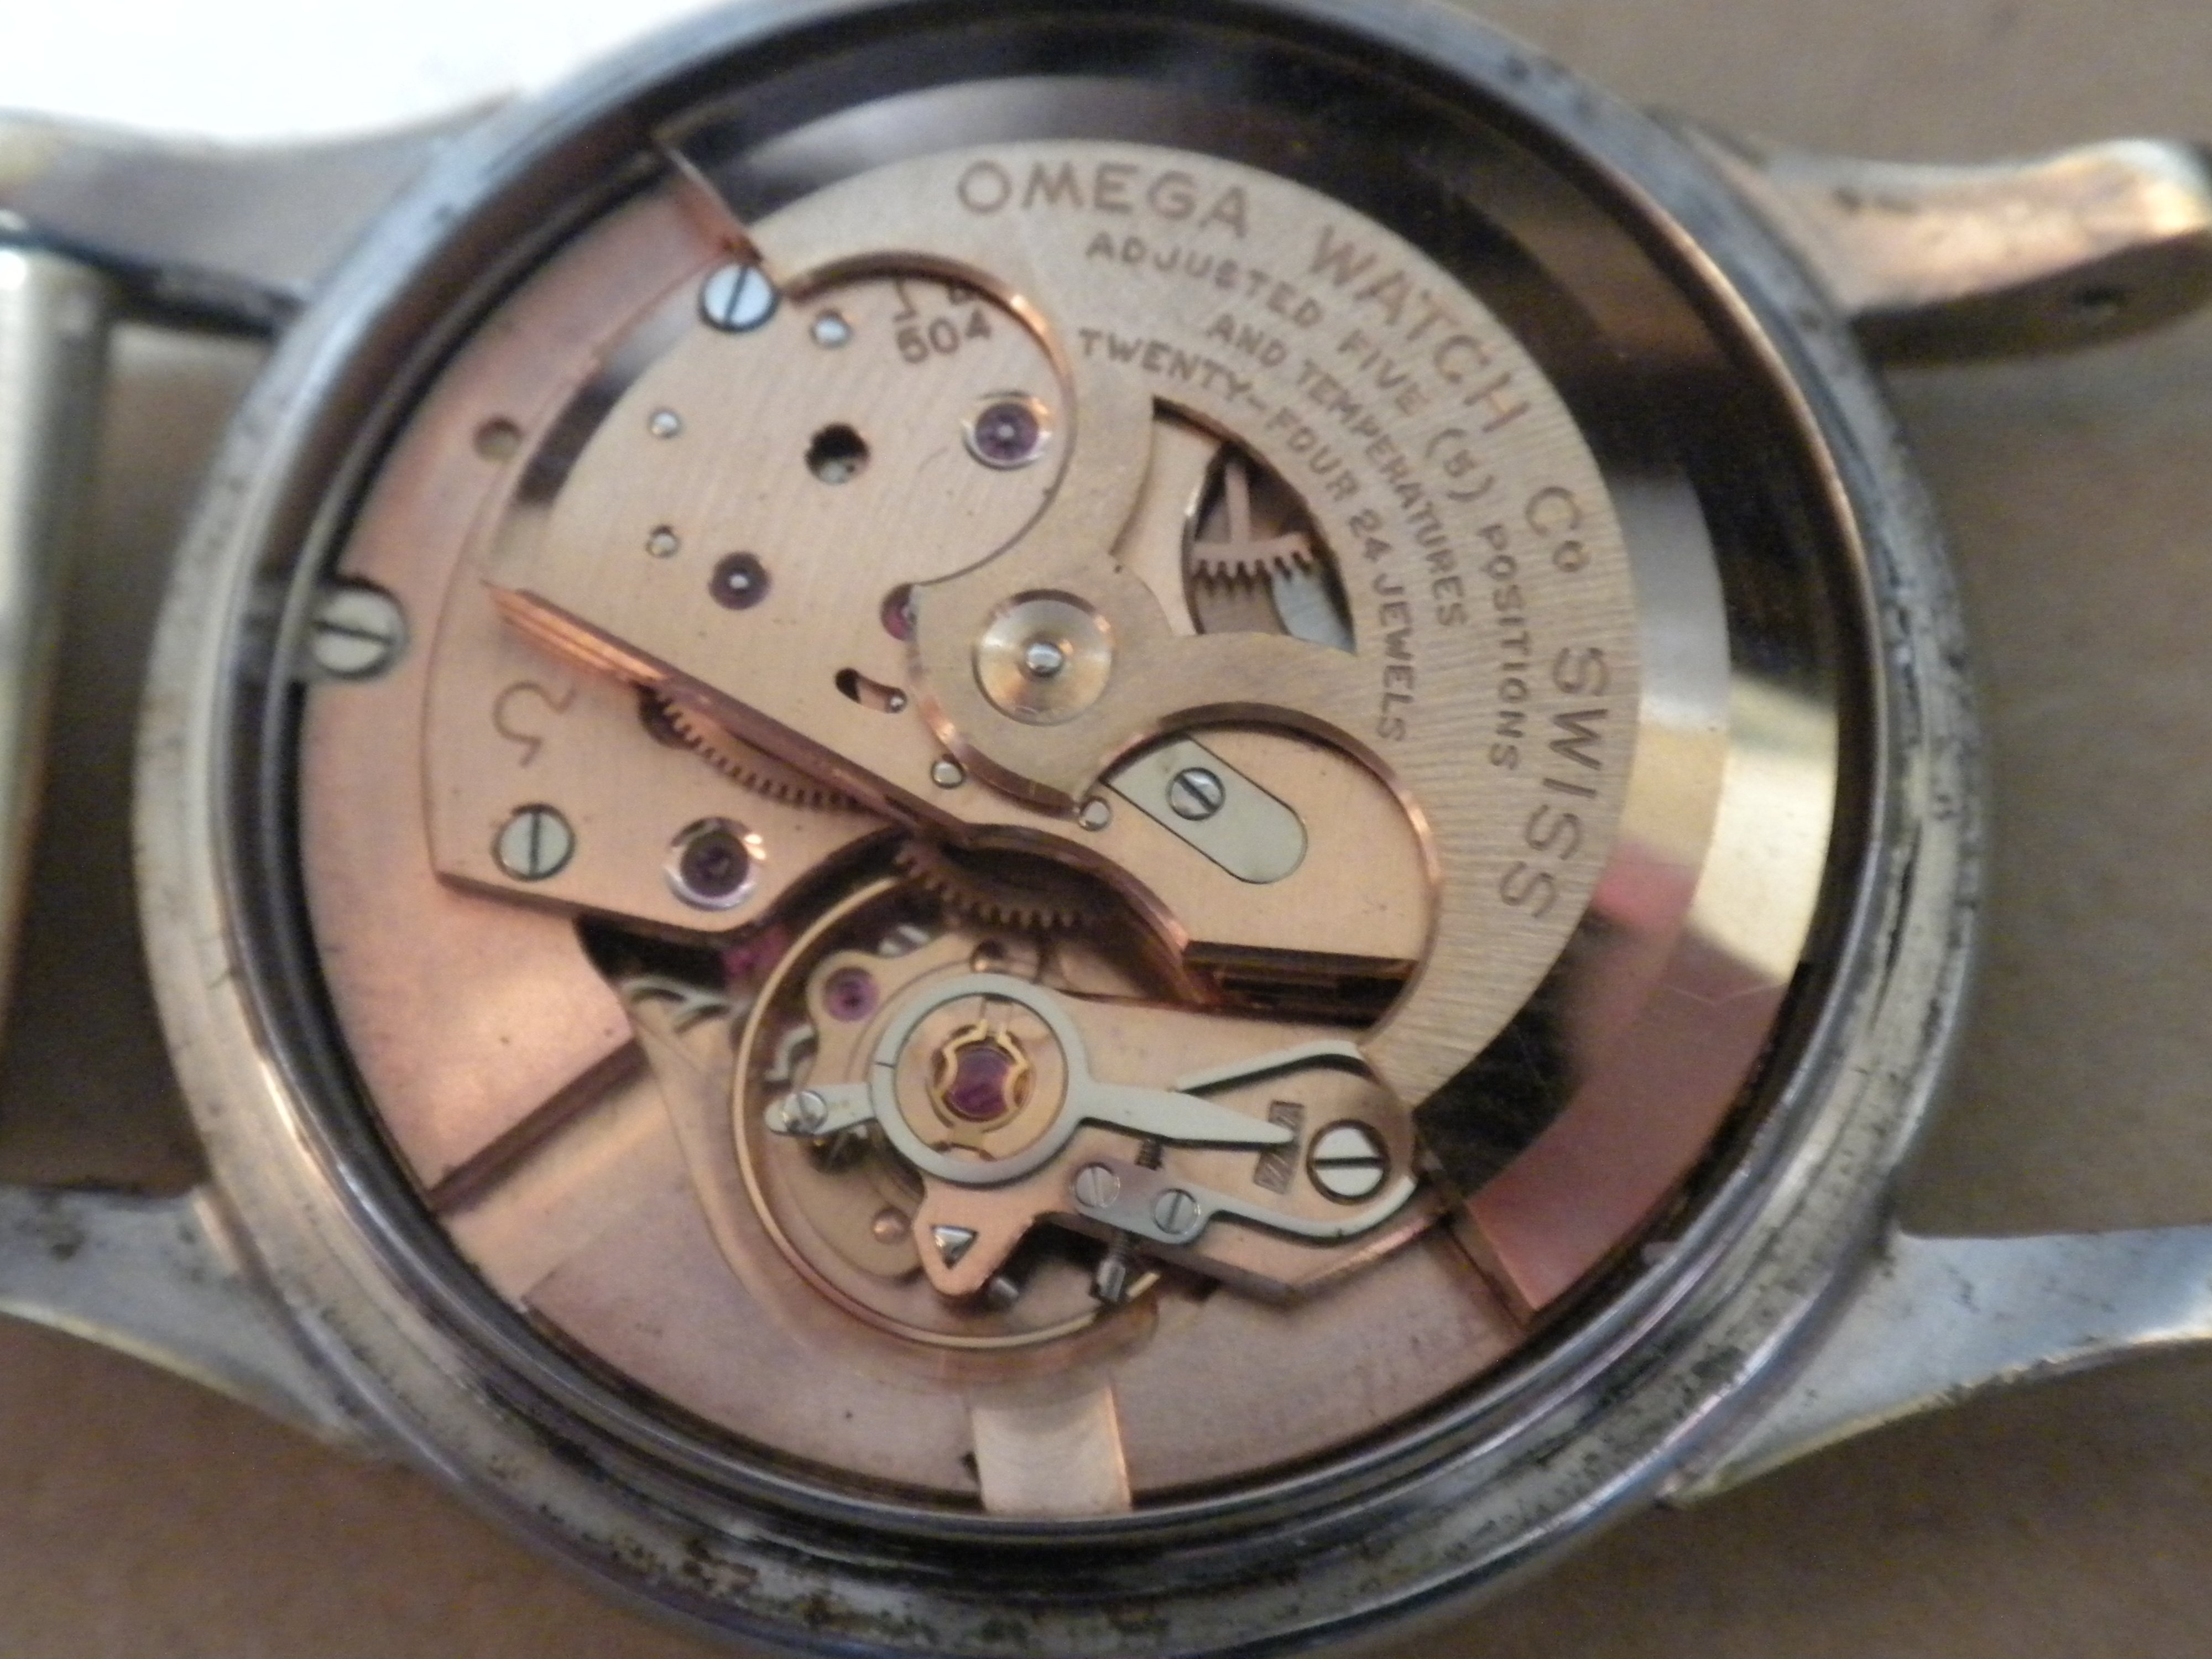 Cal 504 Omega Constellation - Dial 